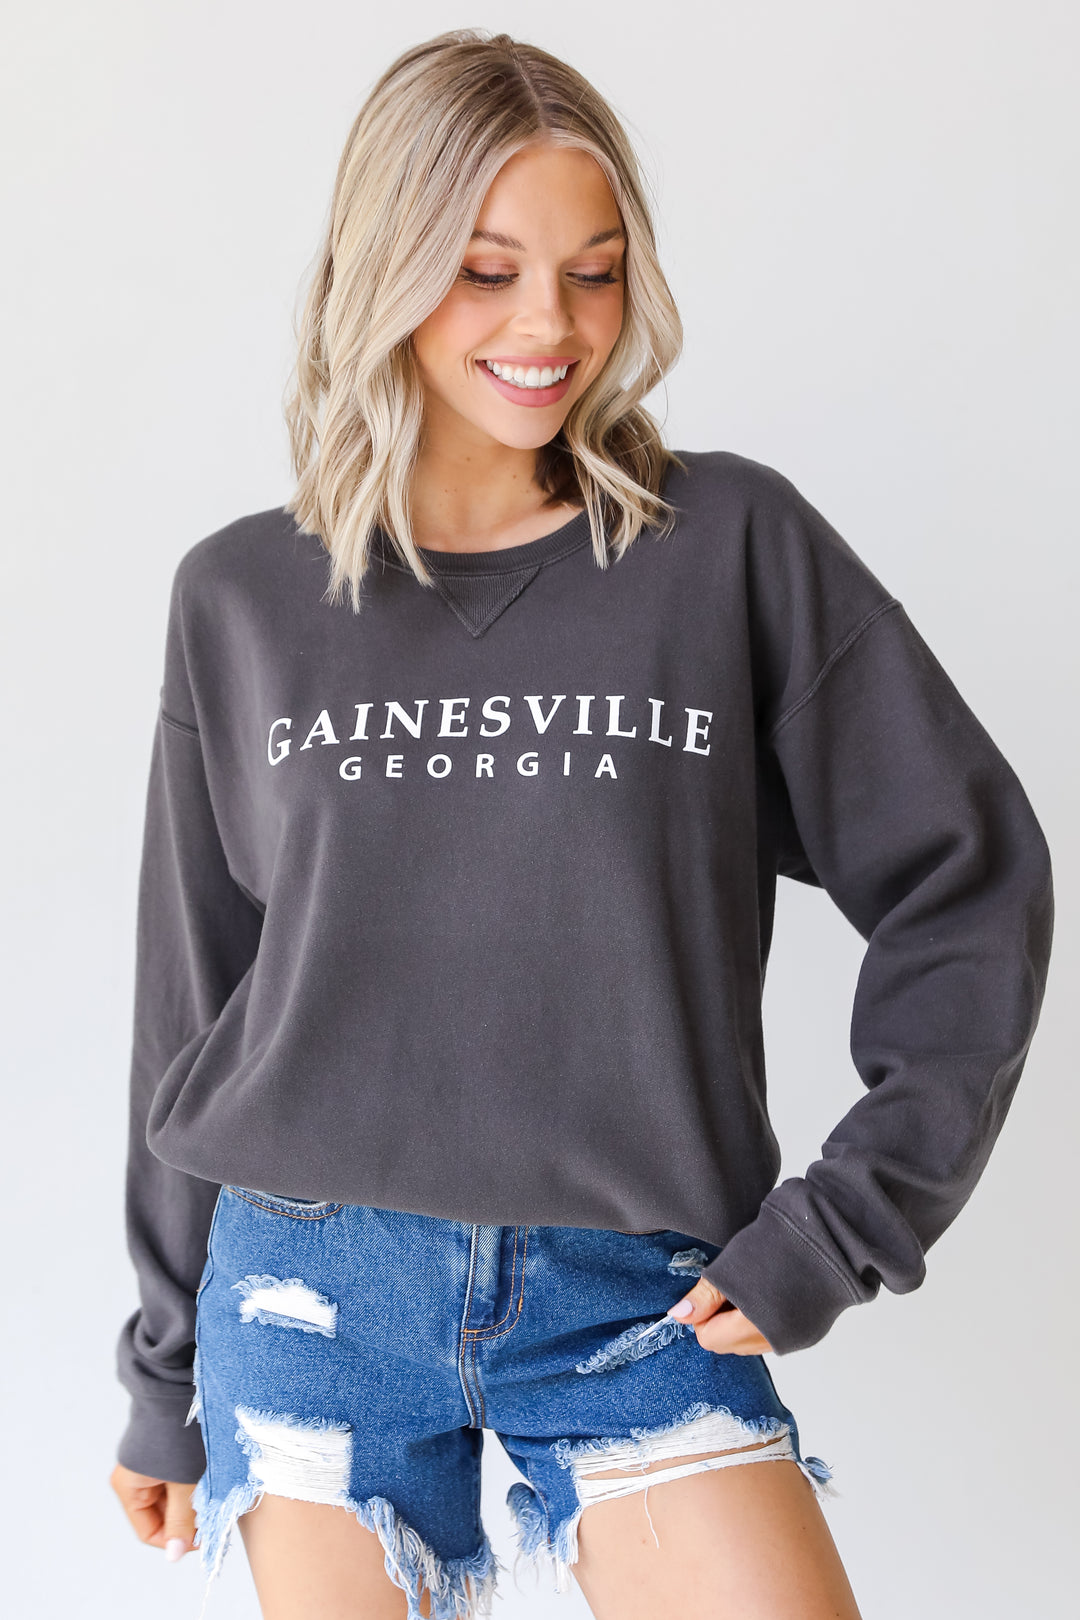 Charcoal Gainesville Georgia Pullover. Graphic Sweatshirt. Gainesville Georgia Sweatshirt